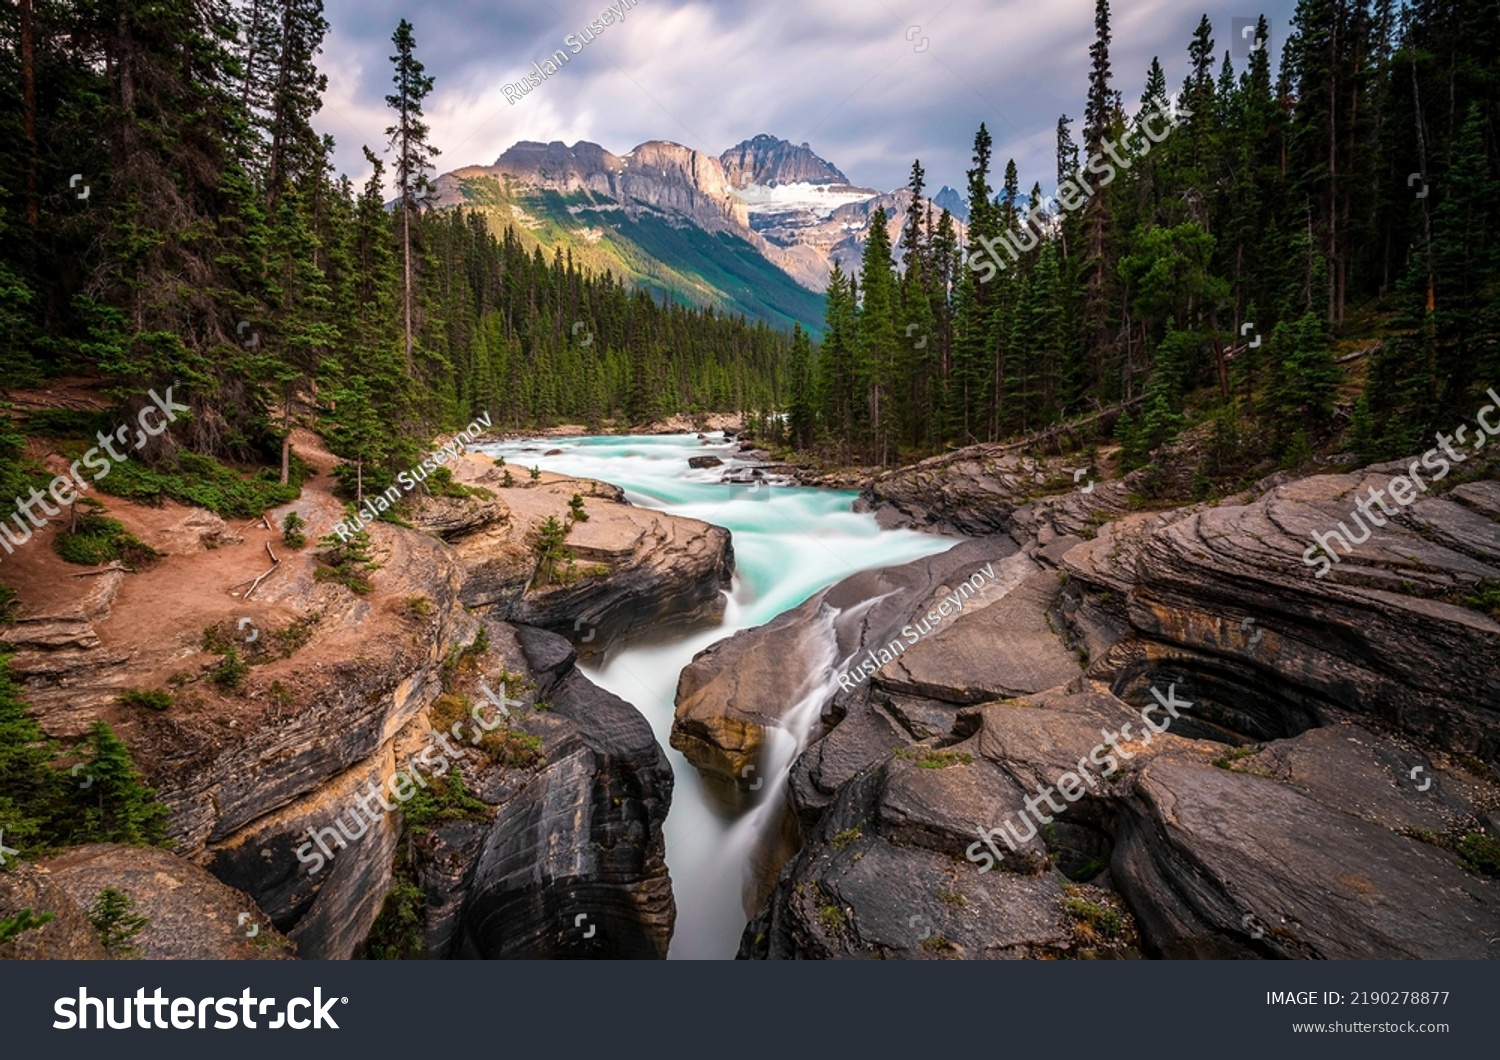 River in mountain forest. River tree near forest waterfall #2190278877